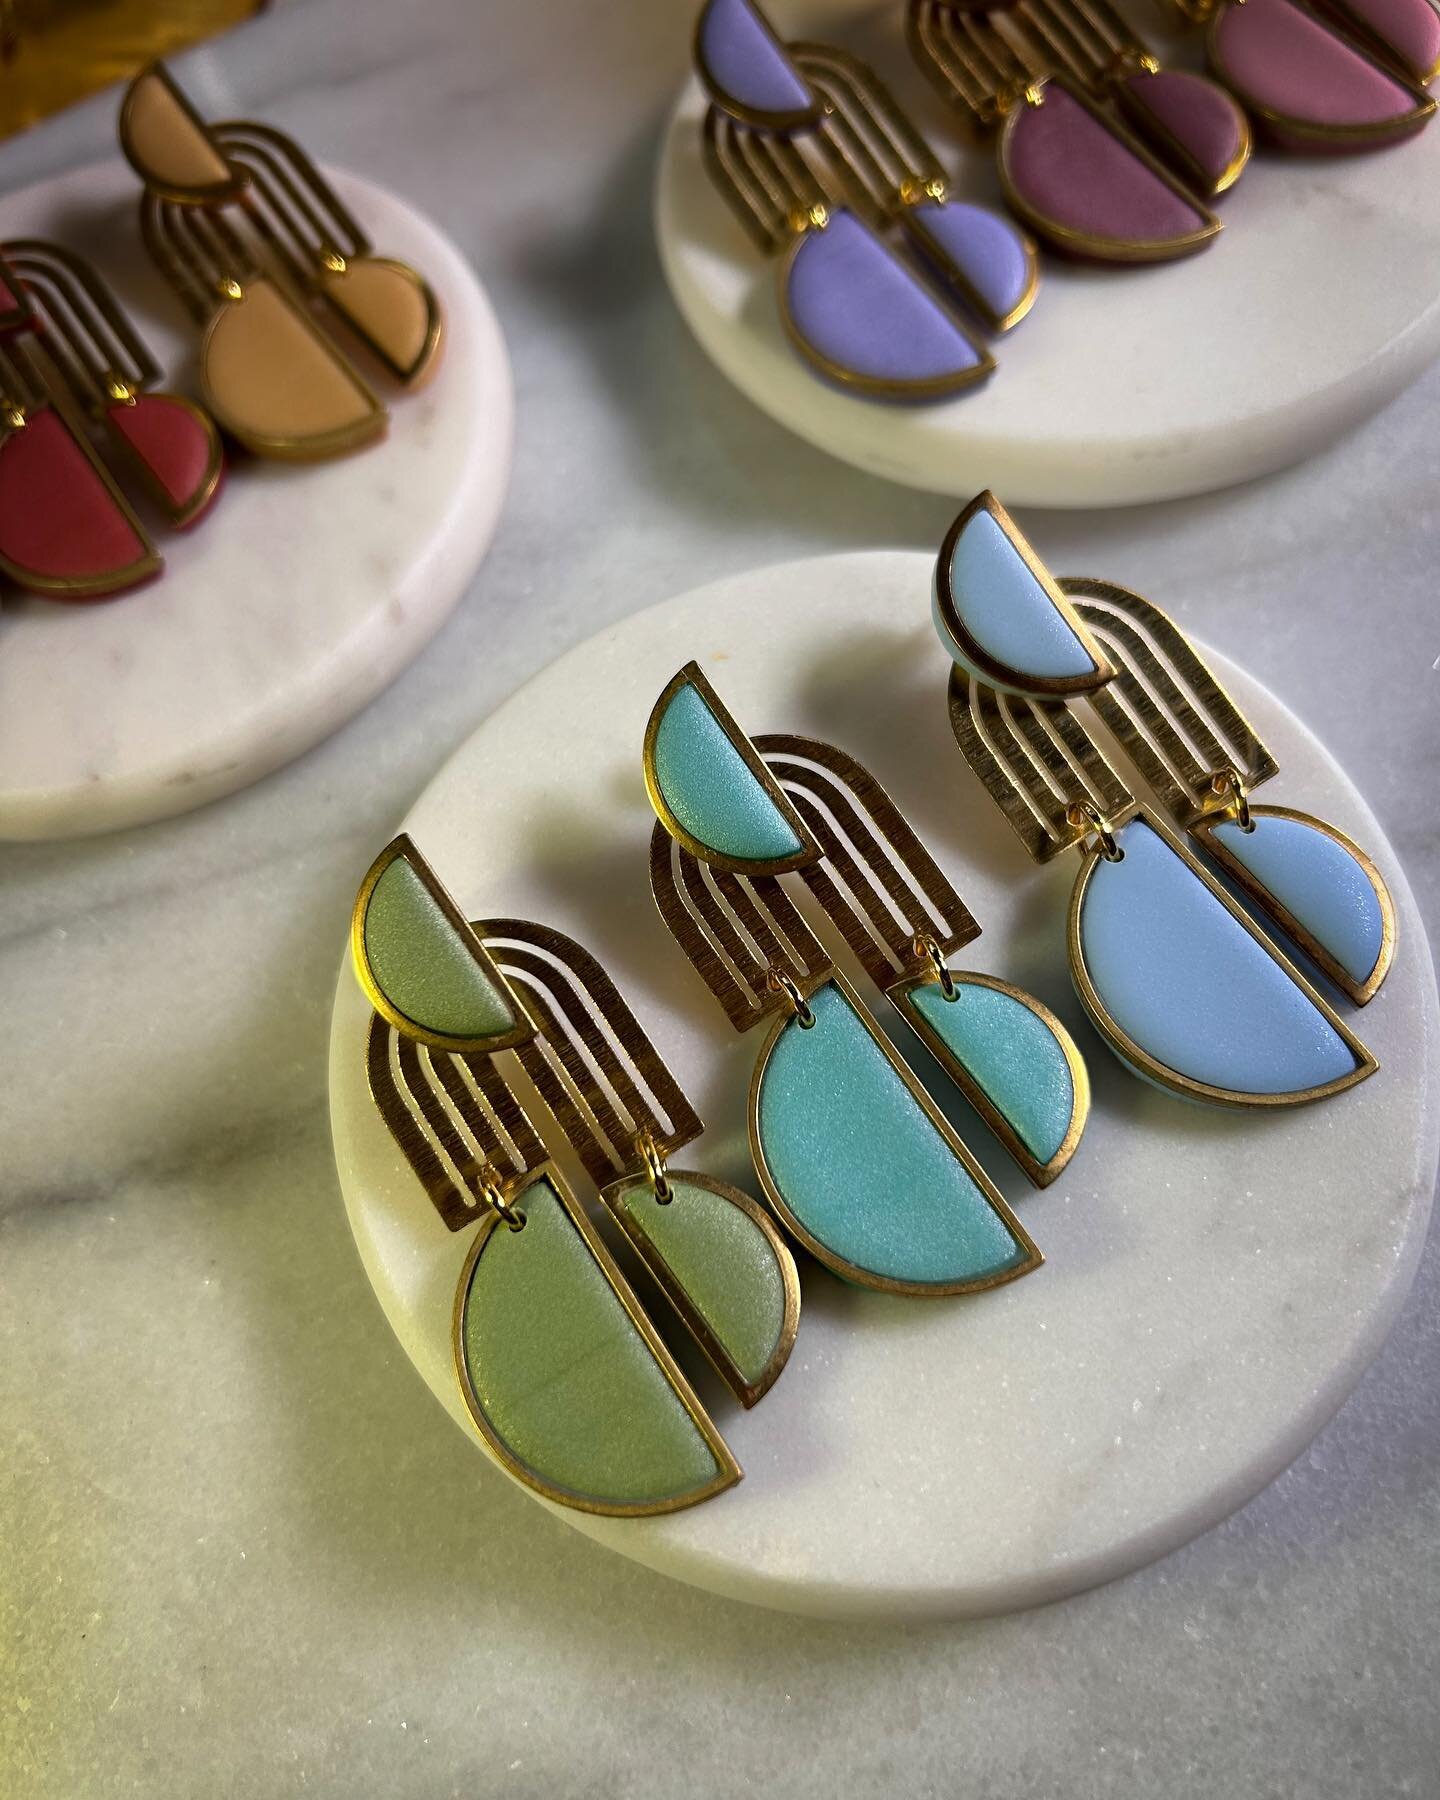 Introducing The Amaryllis earrings 😍😍 The 9 colors pictured here represent the new pastel color line and just 1 of 25 signature styles that will be launched on the website starting Friday at 12pm EST! Of the 25 signature styles 17 of them will be a